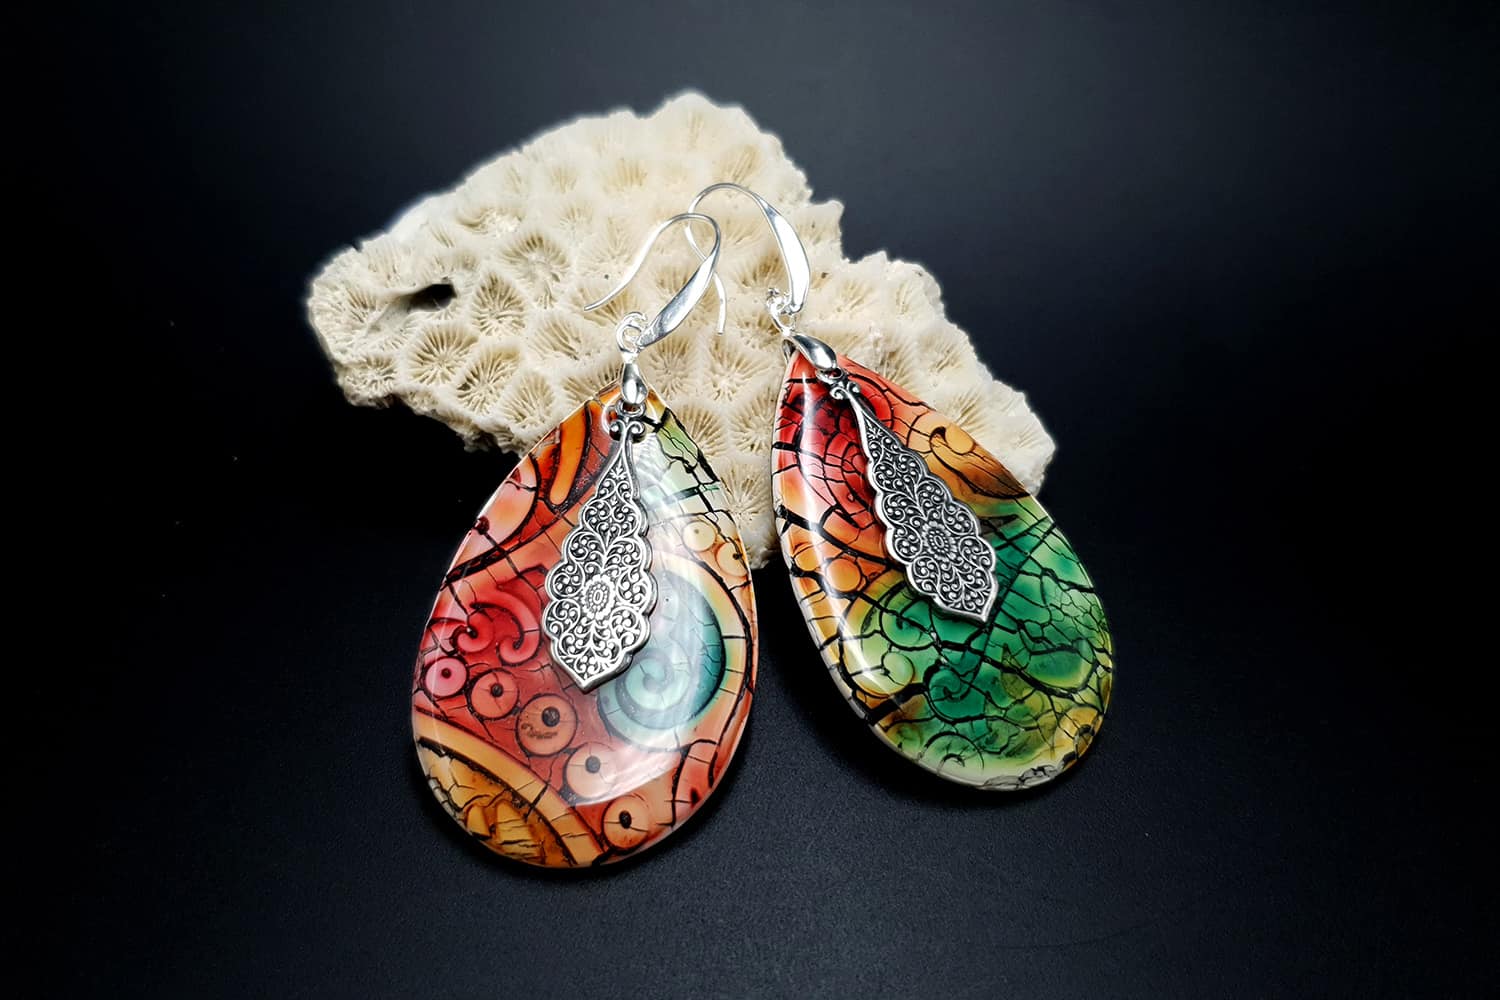 Jewelry from "Faux Glazed Cracked Ceramic" course for your inspiration #1